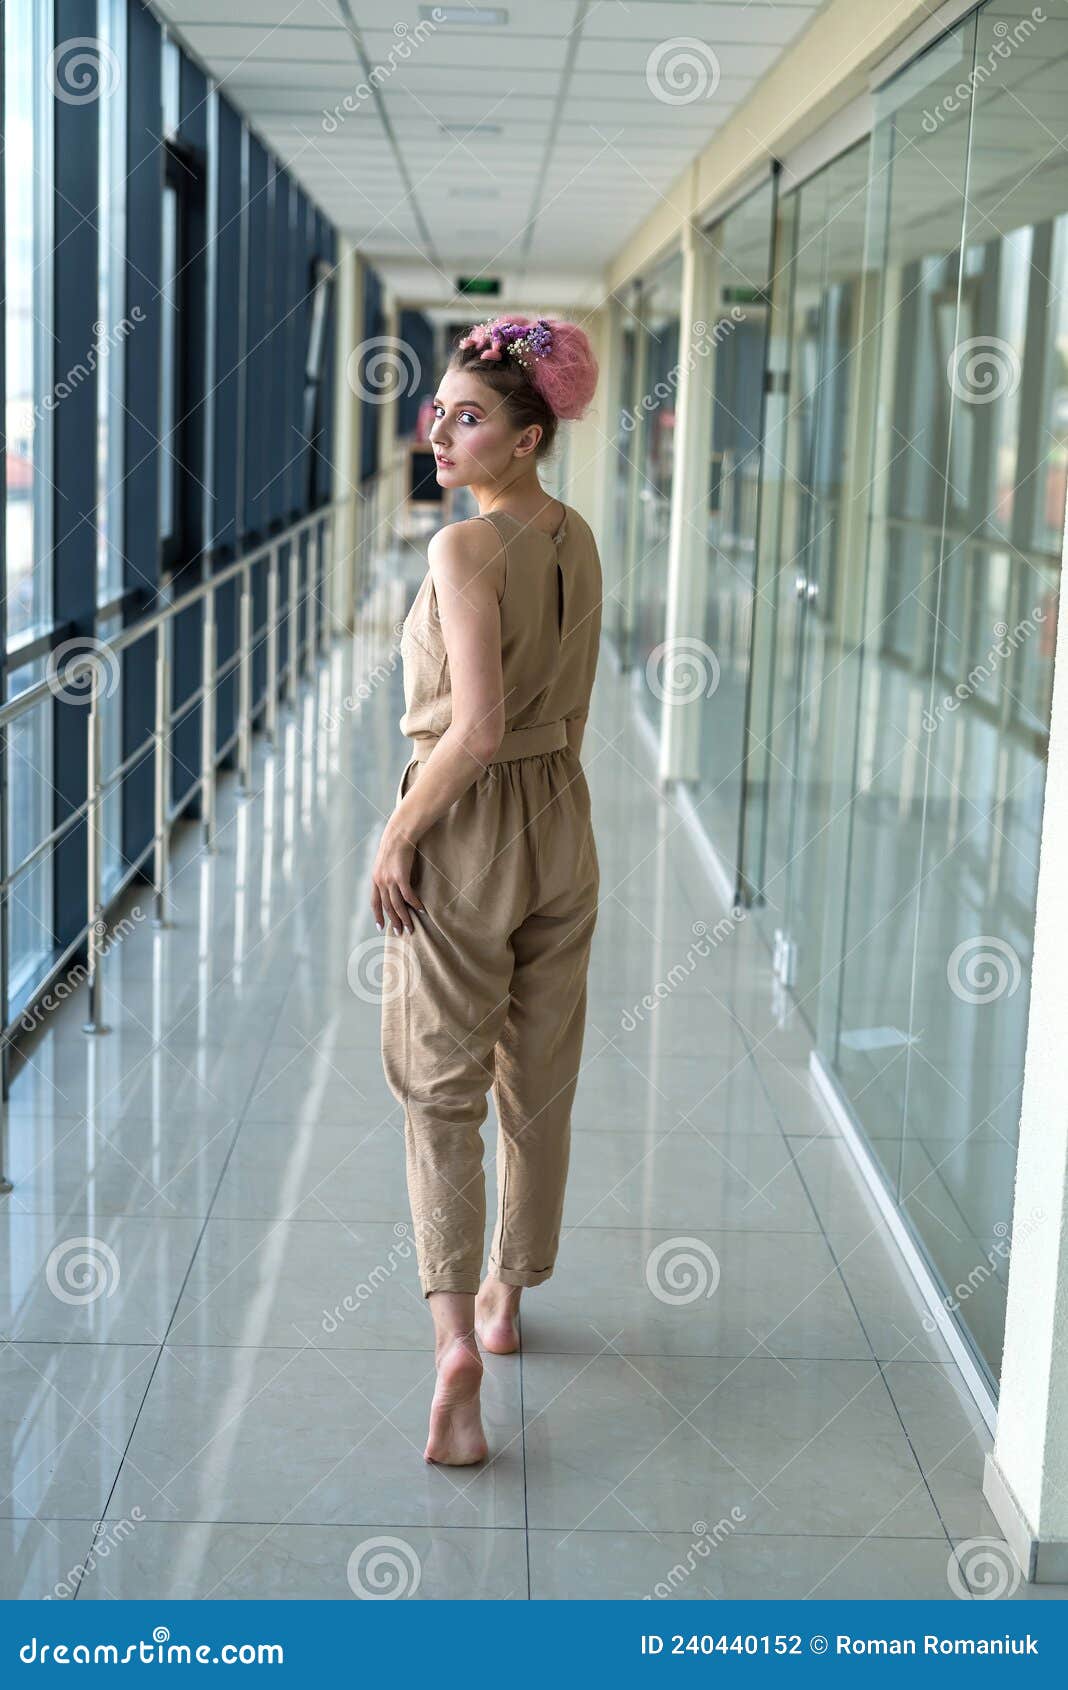 Cute Barefoot Woman Standing and Looking Forward Stock Photo - Image of ...